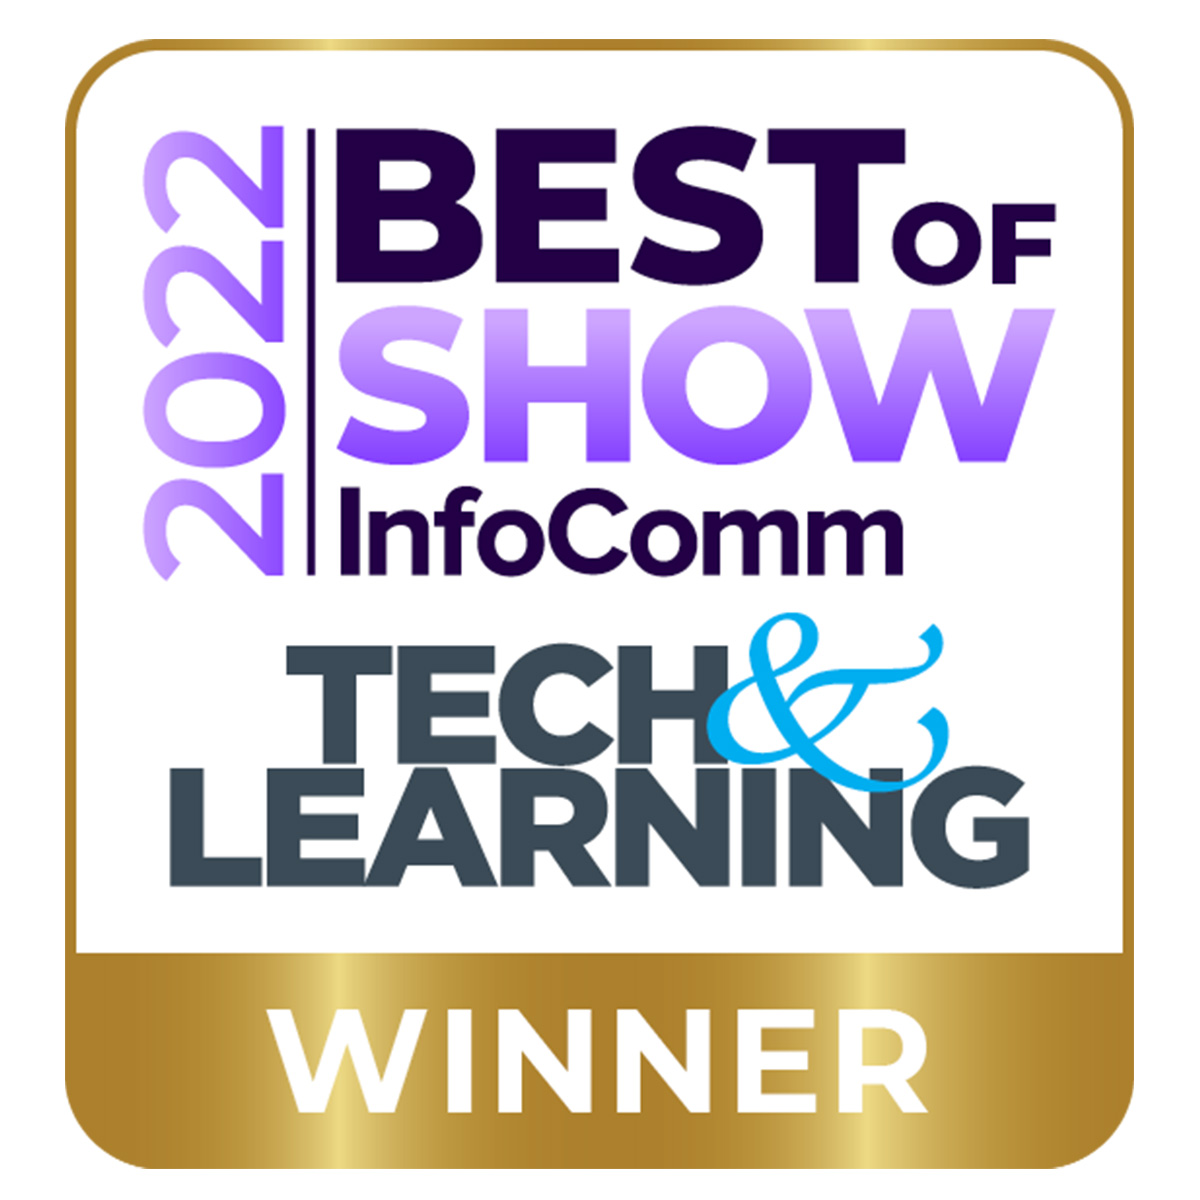 Tech & Learning “Best of Show” at InfoComm